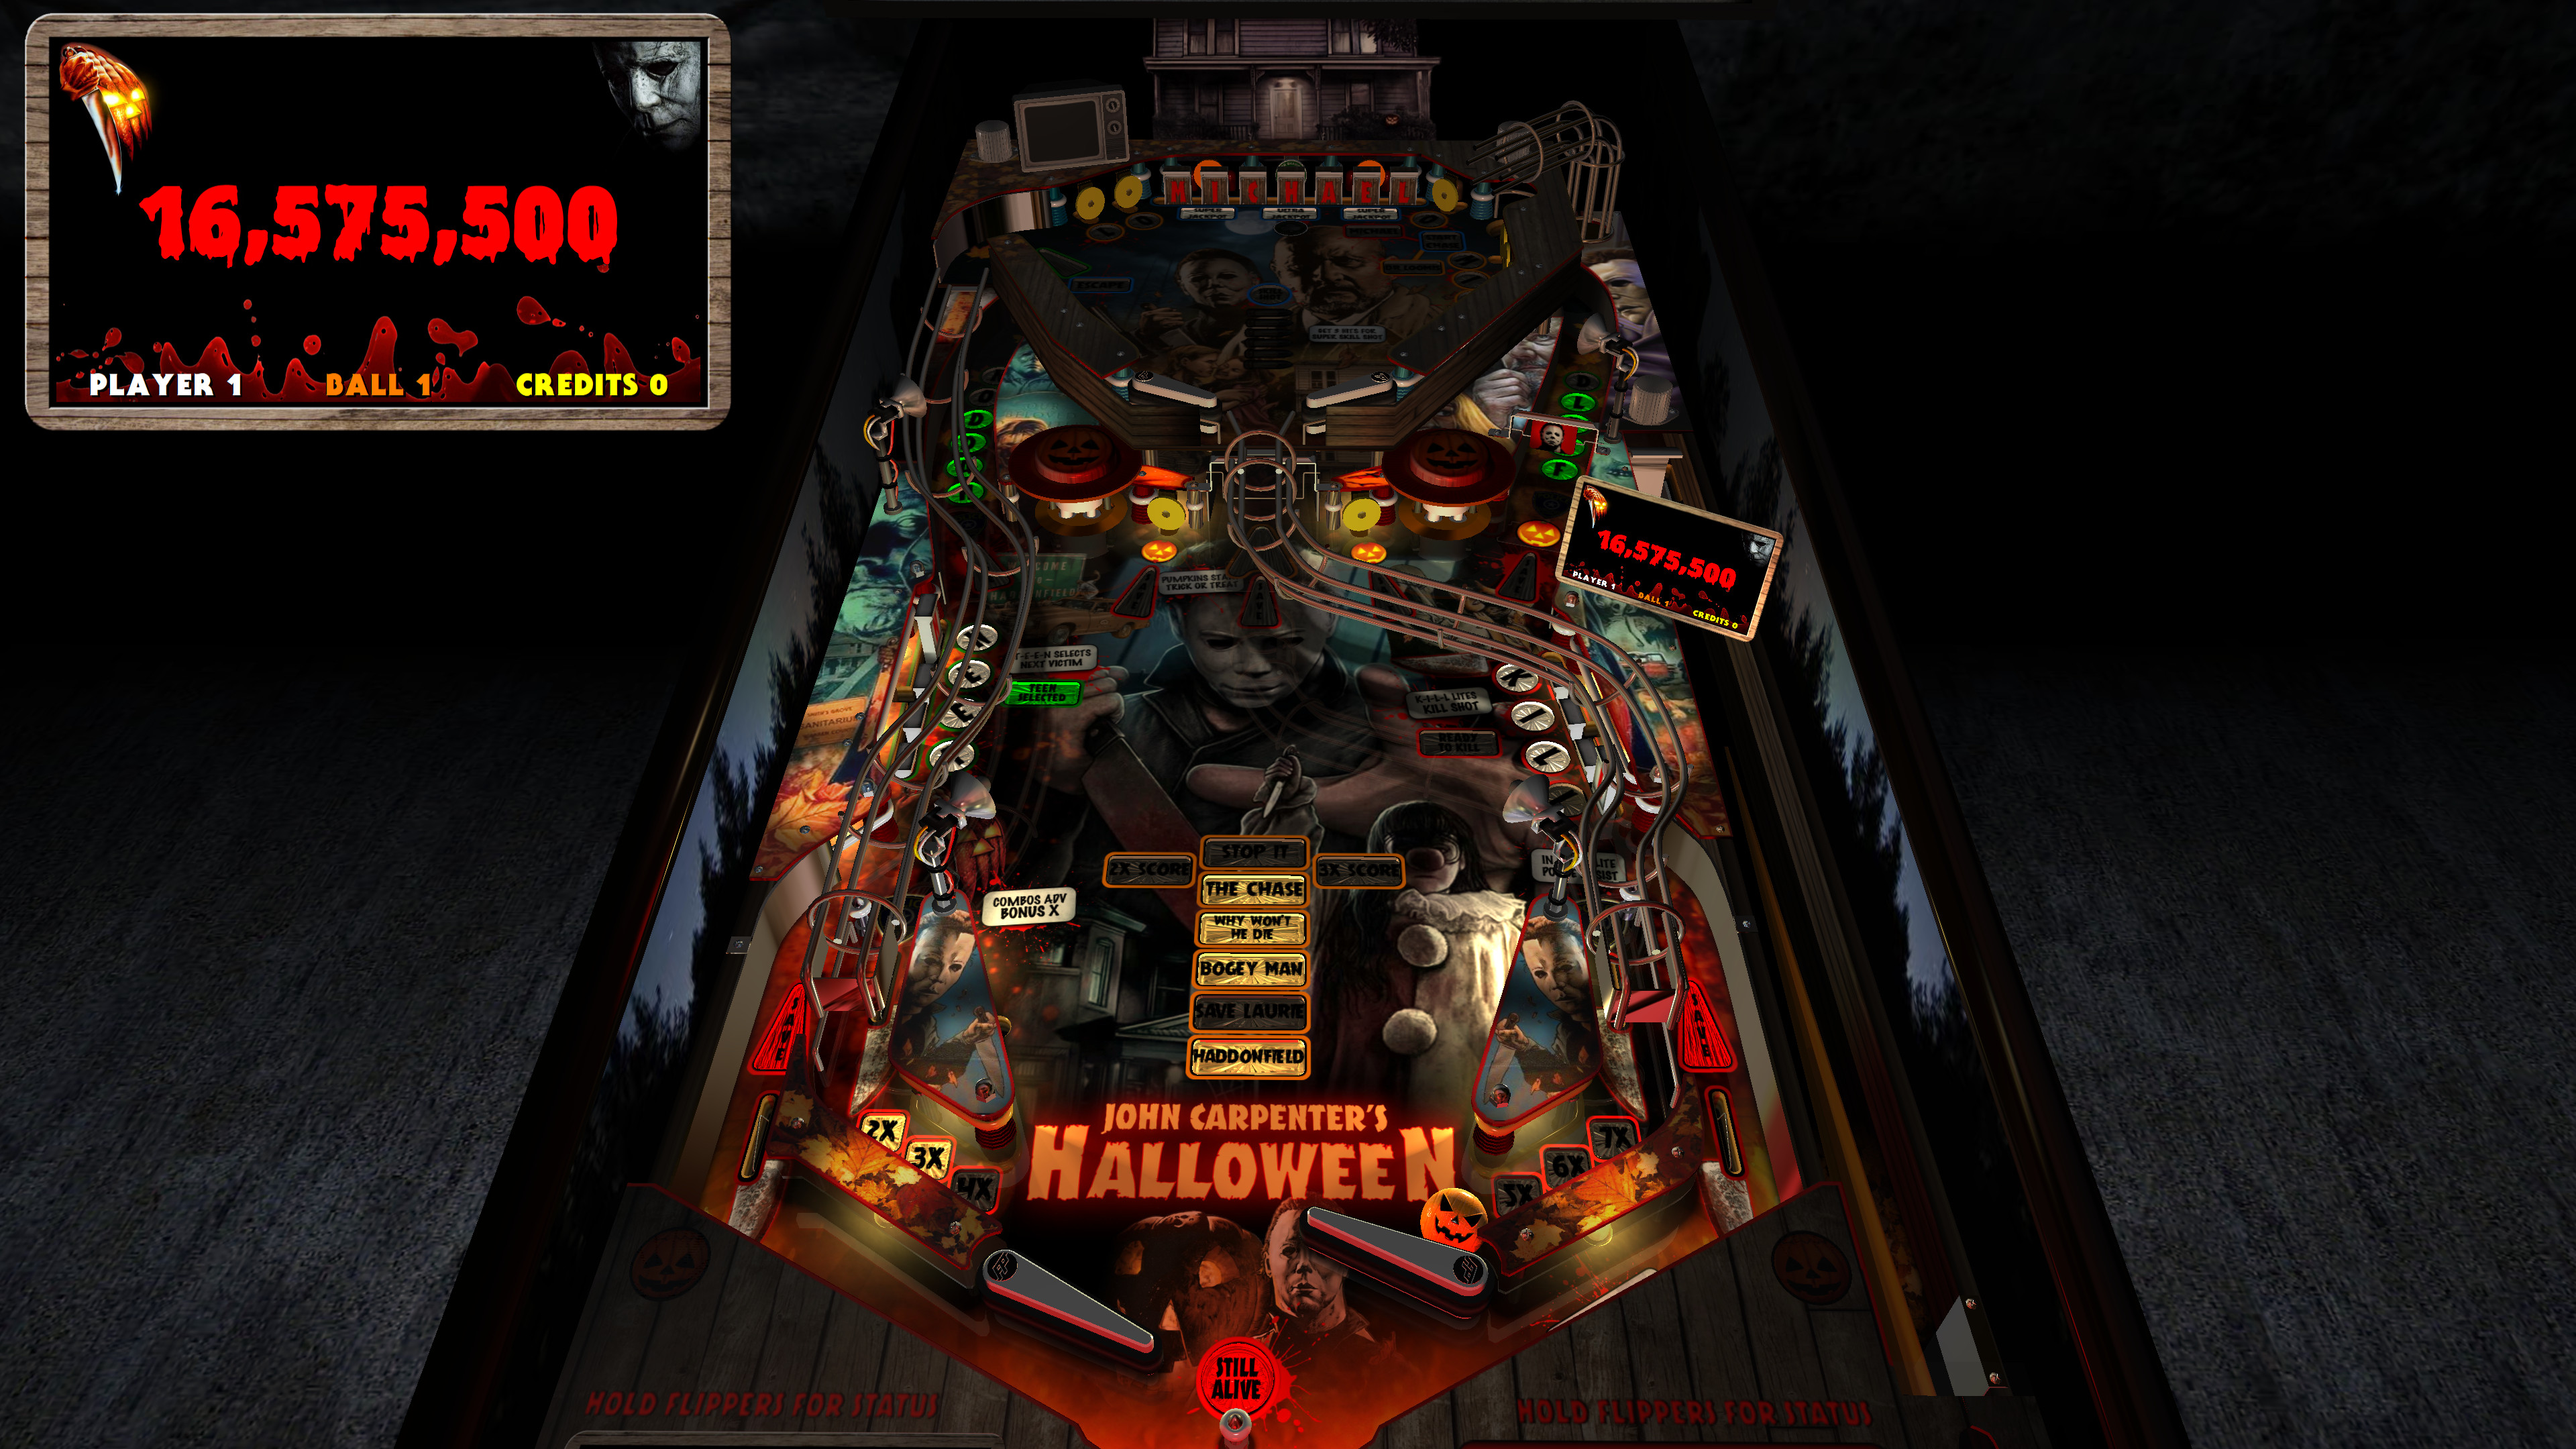 Halloween - Big Bloody Mike (PinEvent V2, FizX 3.0)